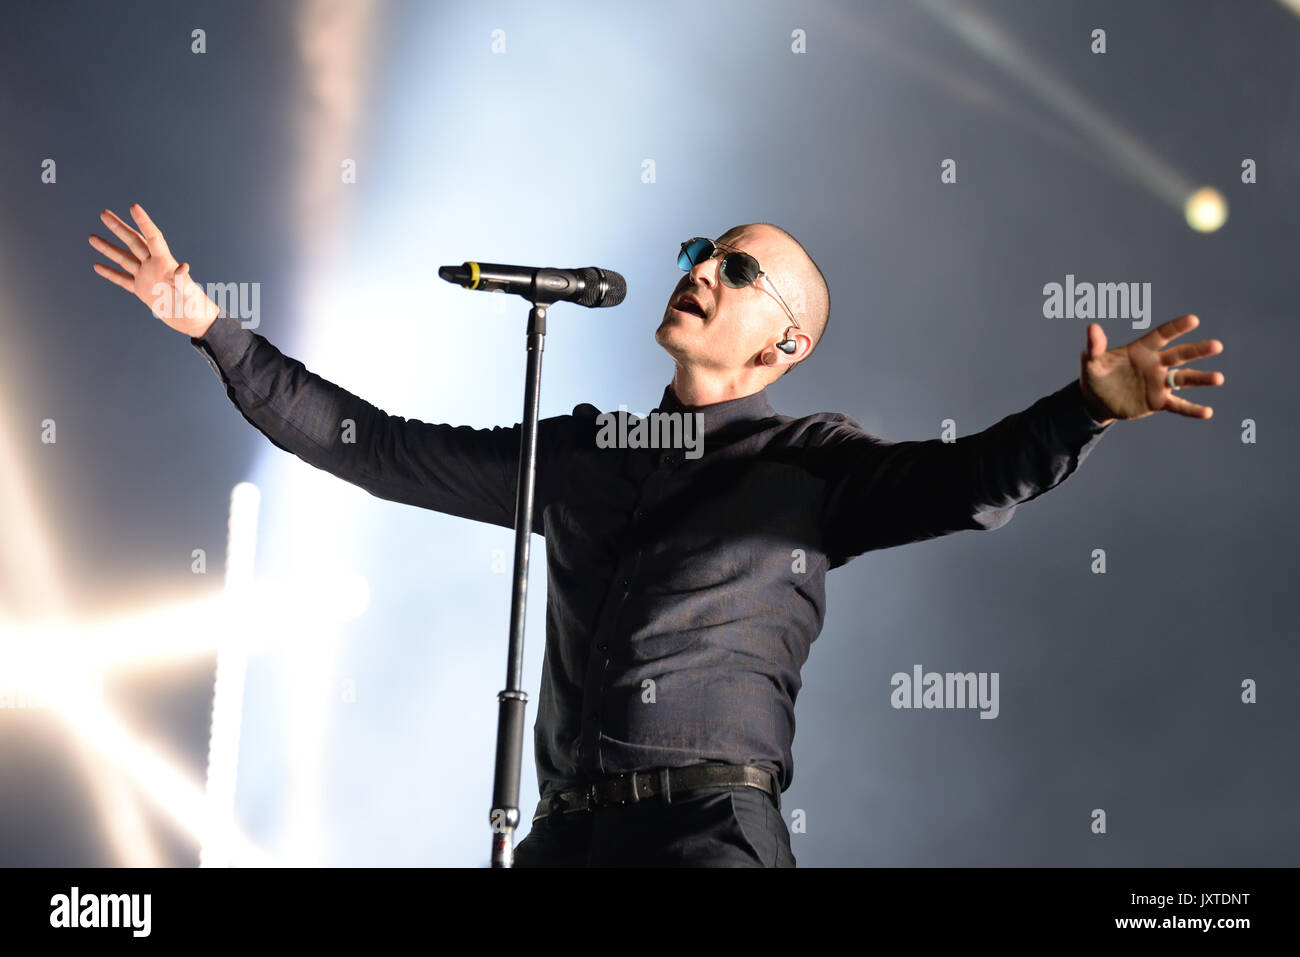 MADRID - JUN 22: Linkin Park (music band) perform in concert at Download (heavy metal music festival) on June 22, 2017 in Madrid, Spain. Stock Photo